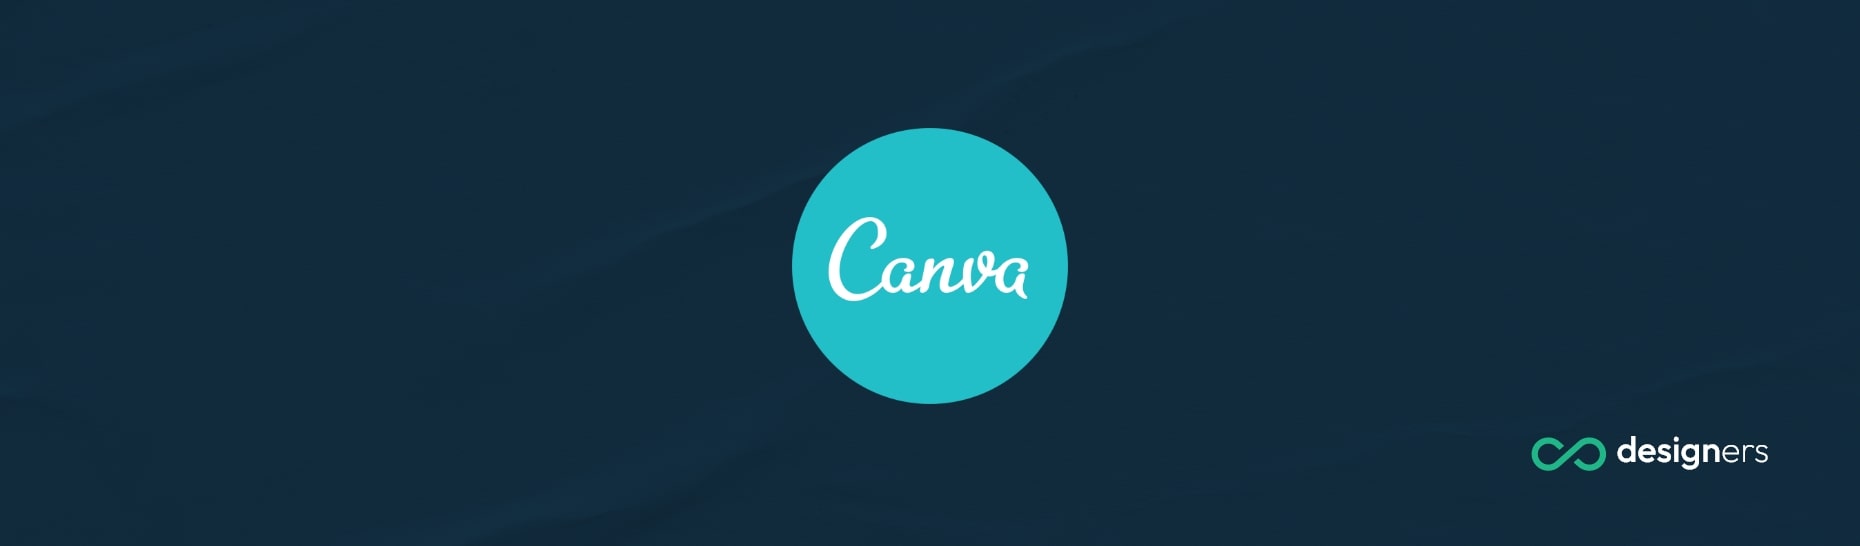 What Is a Good Halloween Font on Canva?